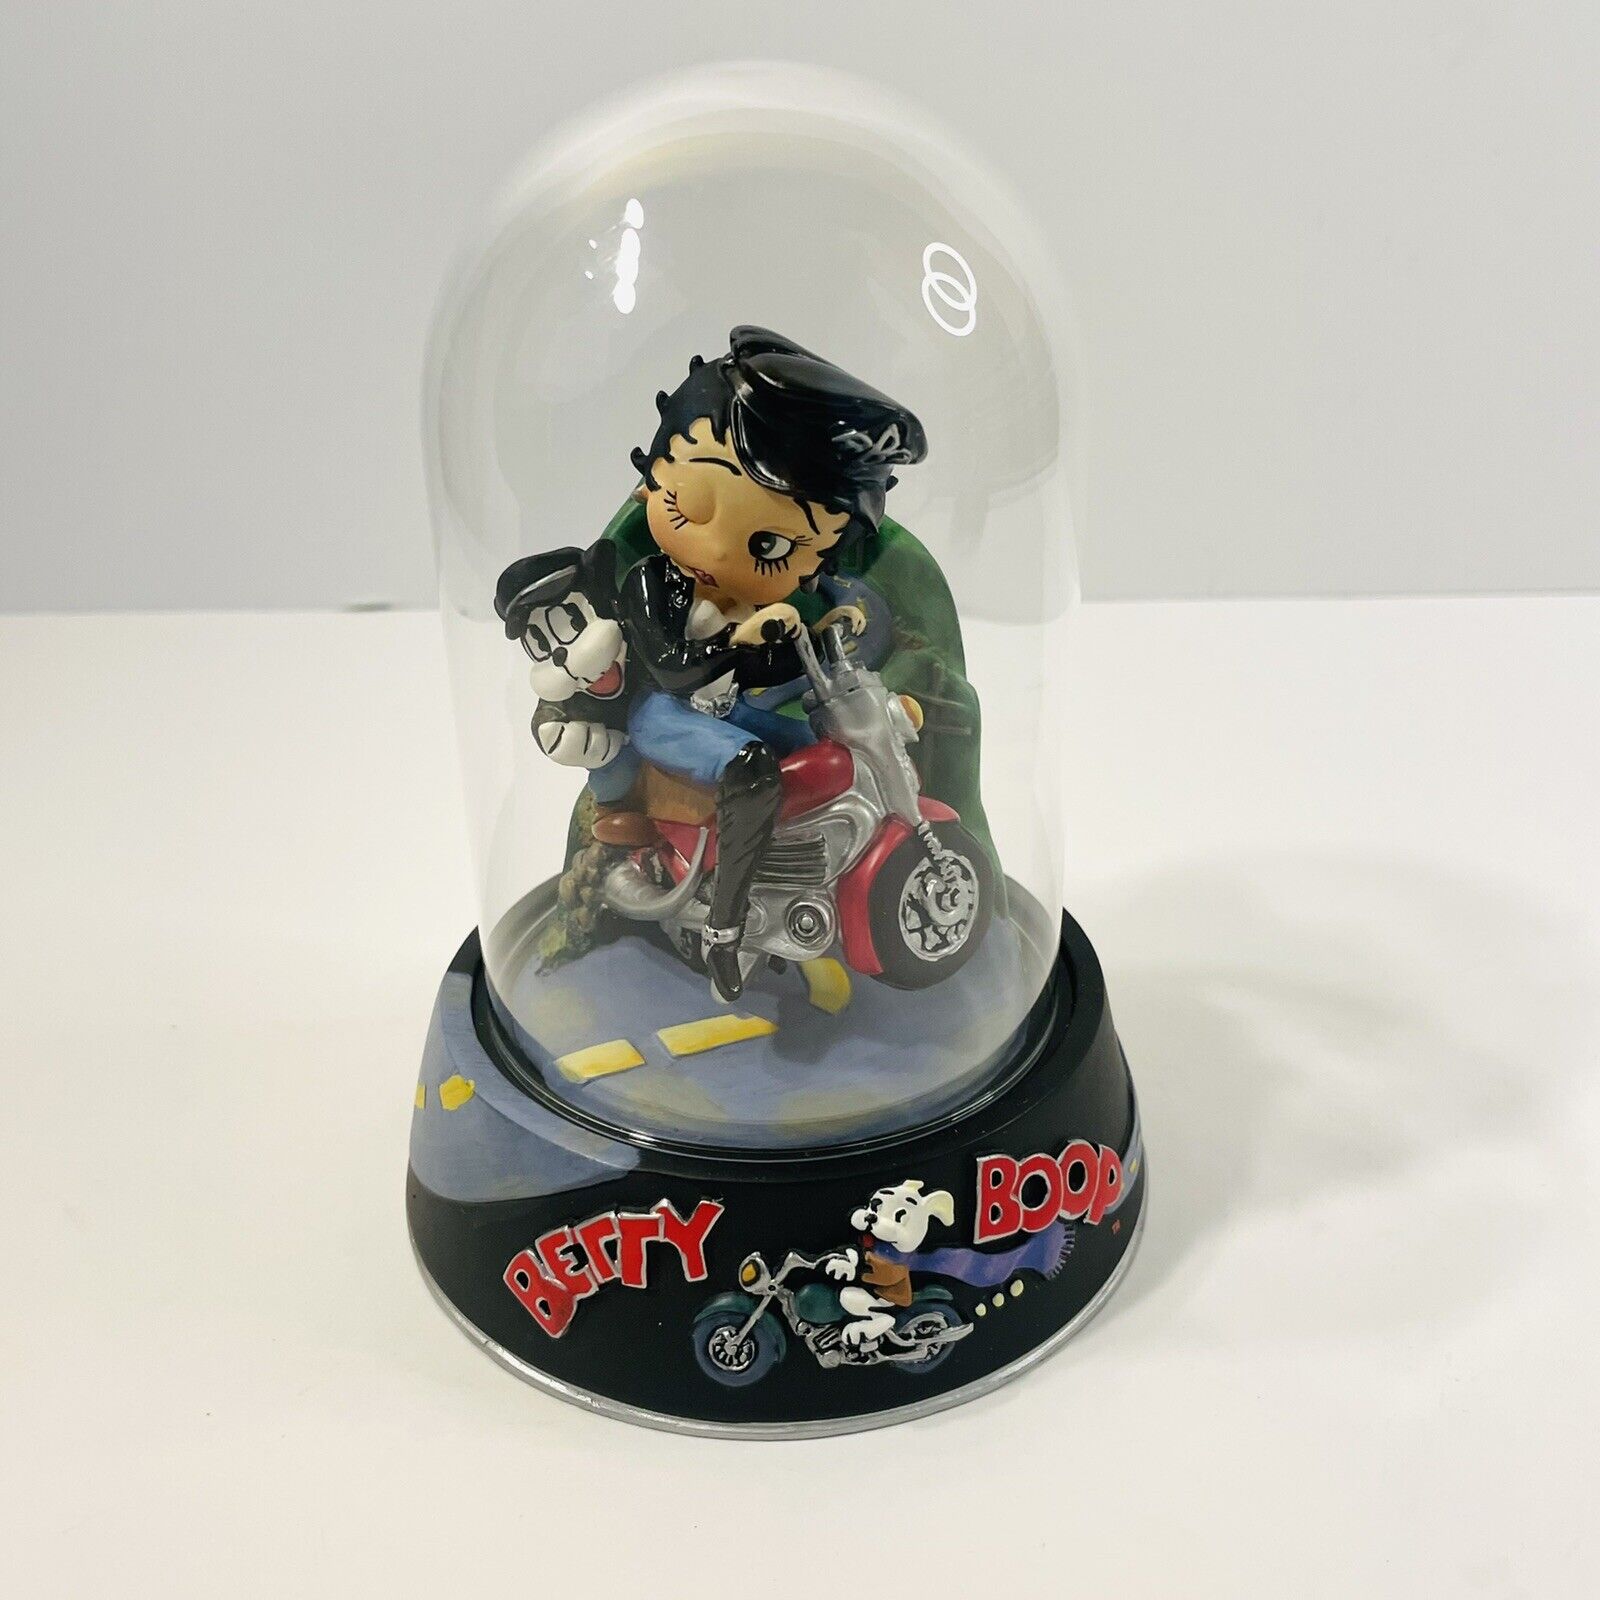 VINTAGE 1996 Betty Boop “Born to be Boop” Sculpted Glass Dome Figurine